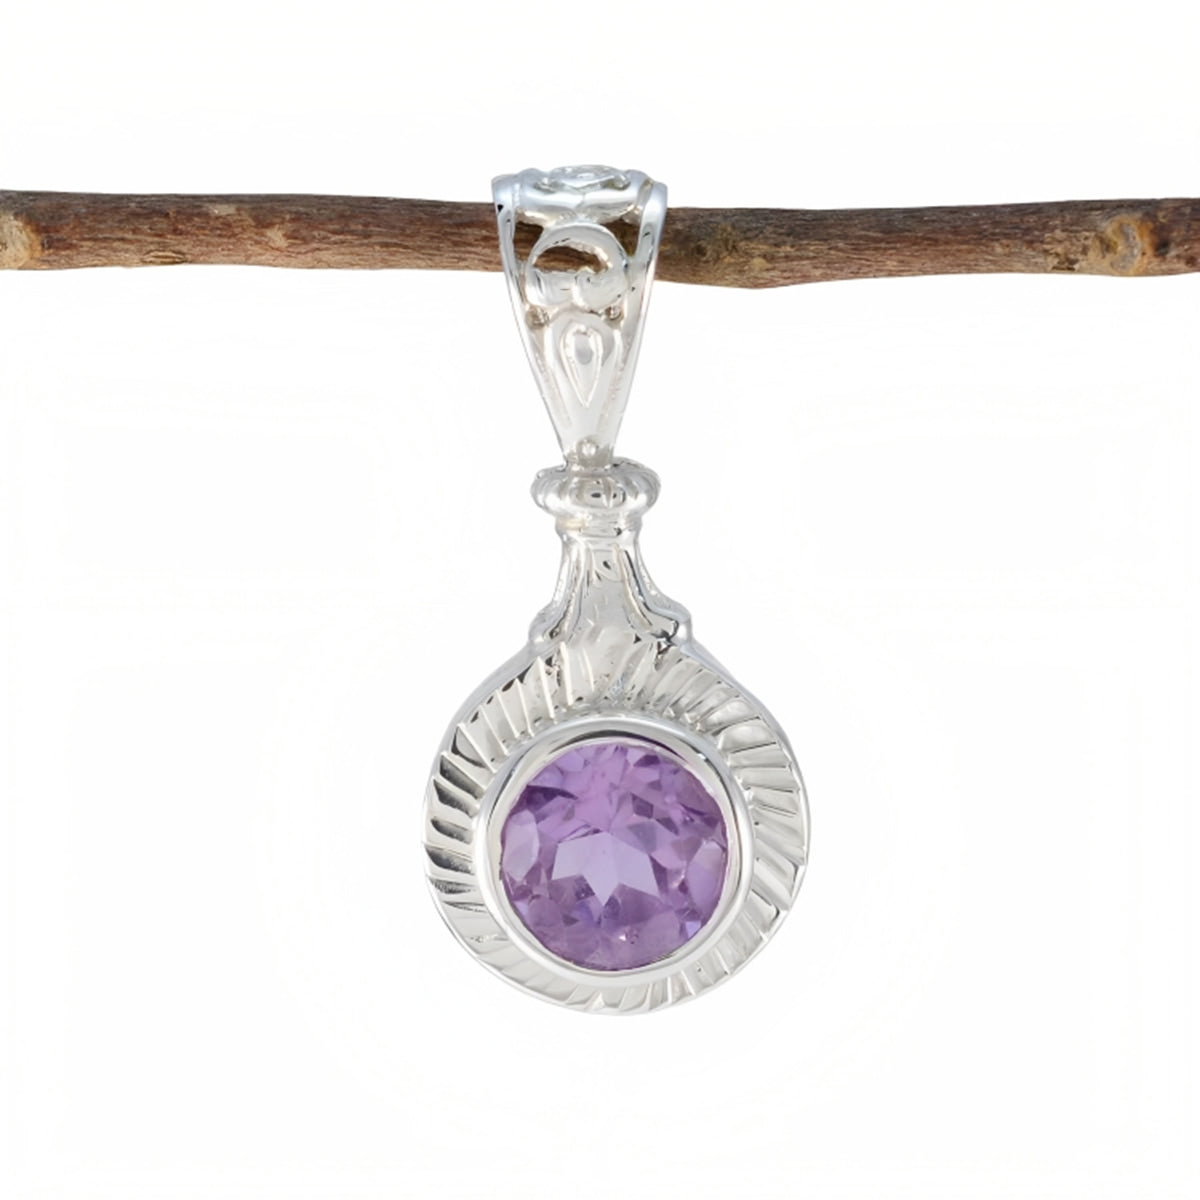 Riyo Smashing Gems Round Faceted Purple Amethyst Silver Pendant Gift For Wife